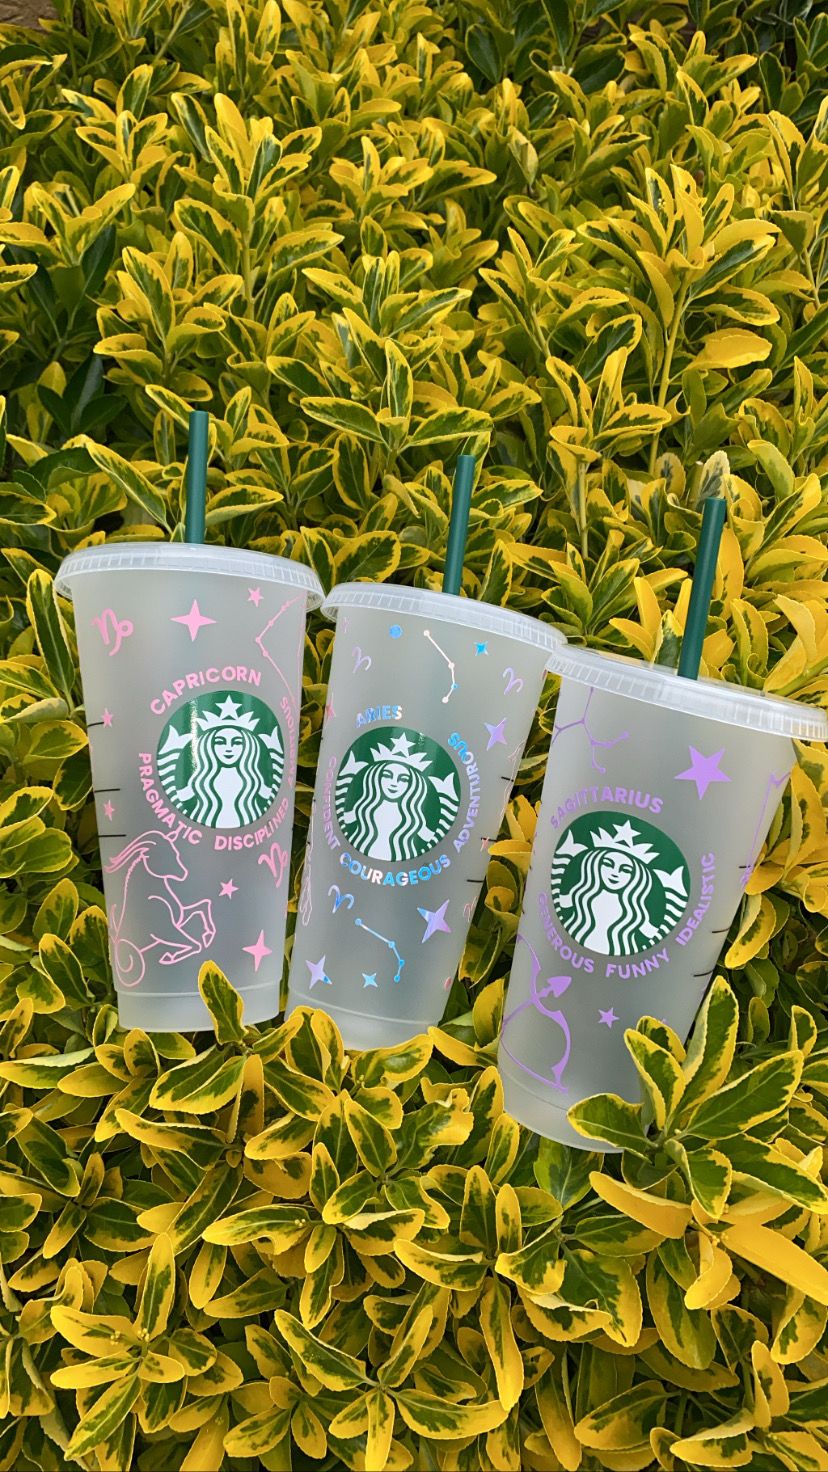 Heart Theme Starbucks personalized cup , Reusable, Super Cute